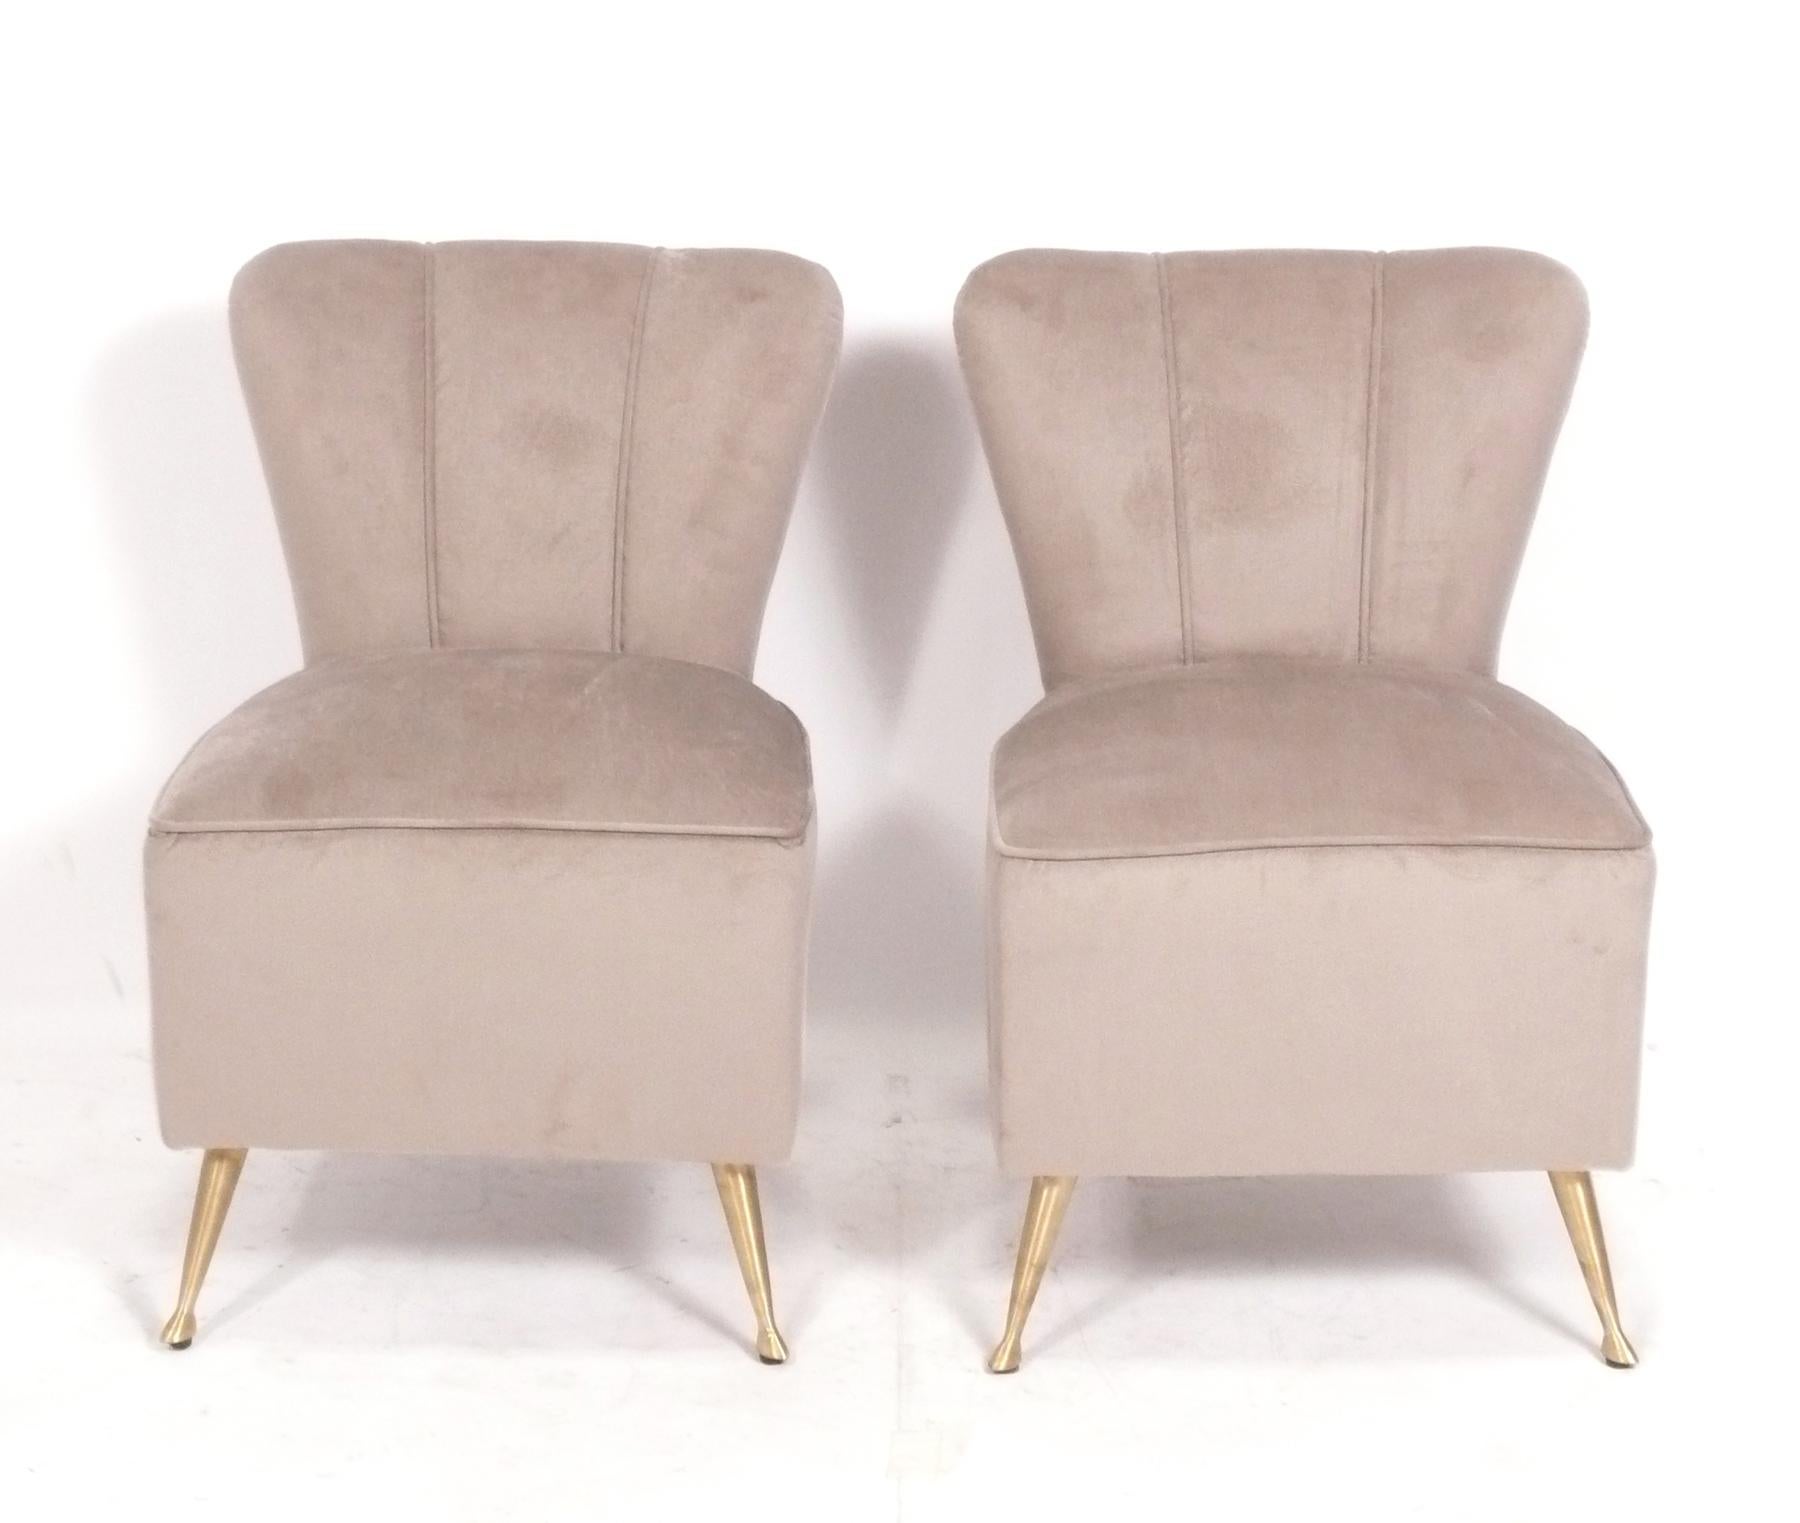 Pair of Petite Italian Mid Century Style Slipper Chairs, Italy, circa 2000s. Based on a 1950s design, these were produced in the 2000s. They look great from every angle. 